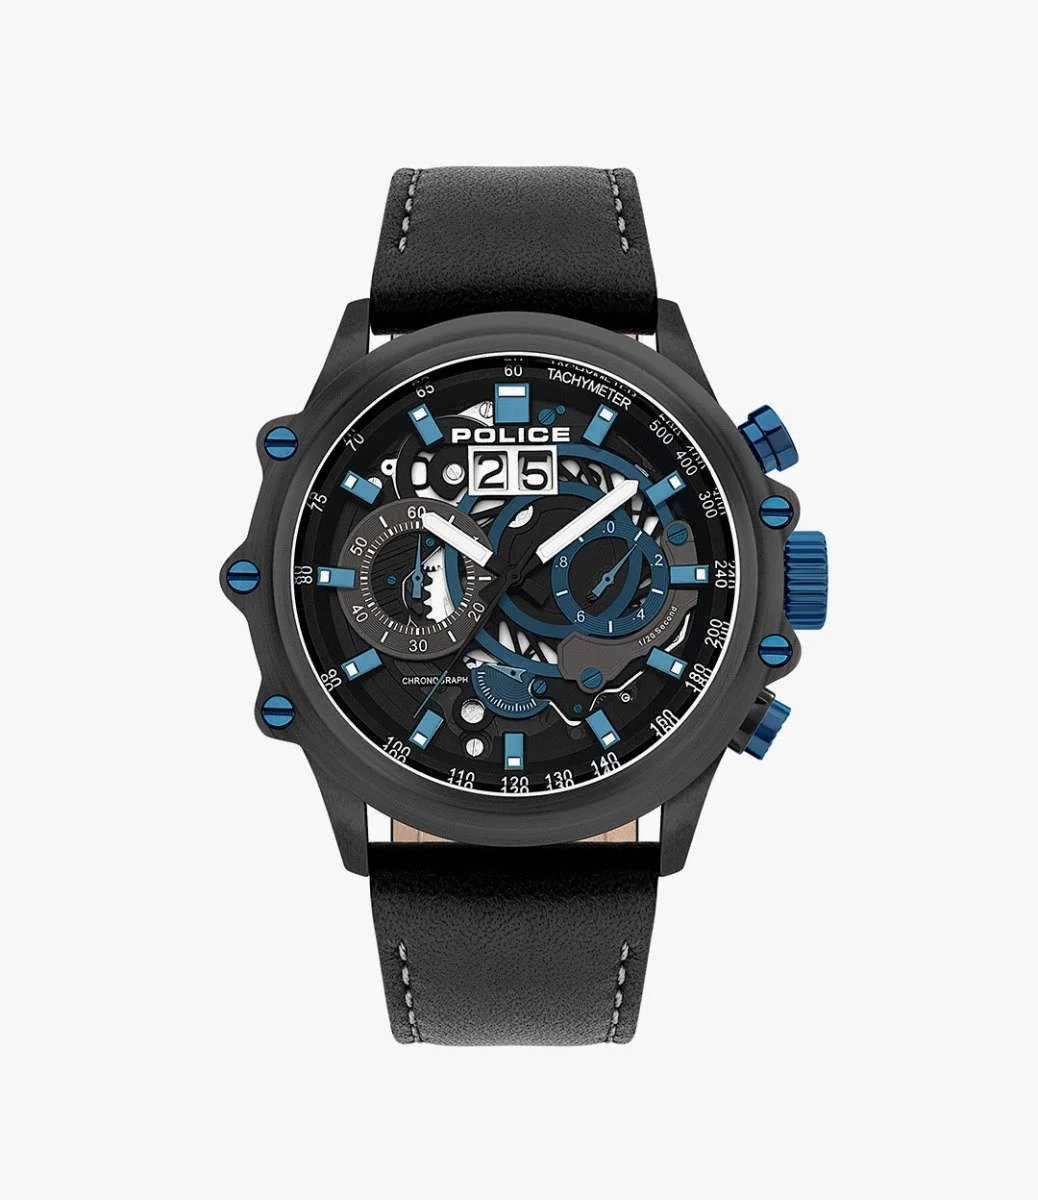 Police Chronograph Watch for Men